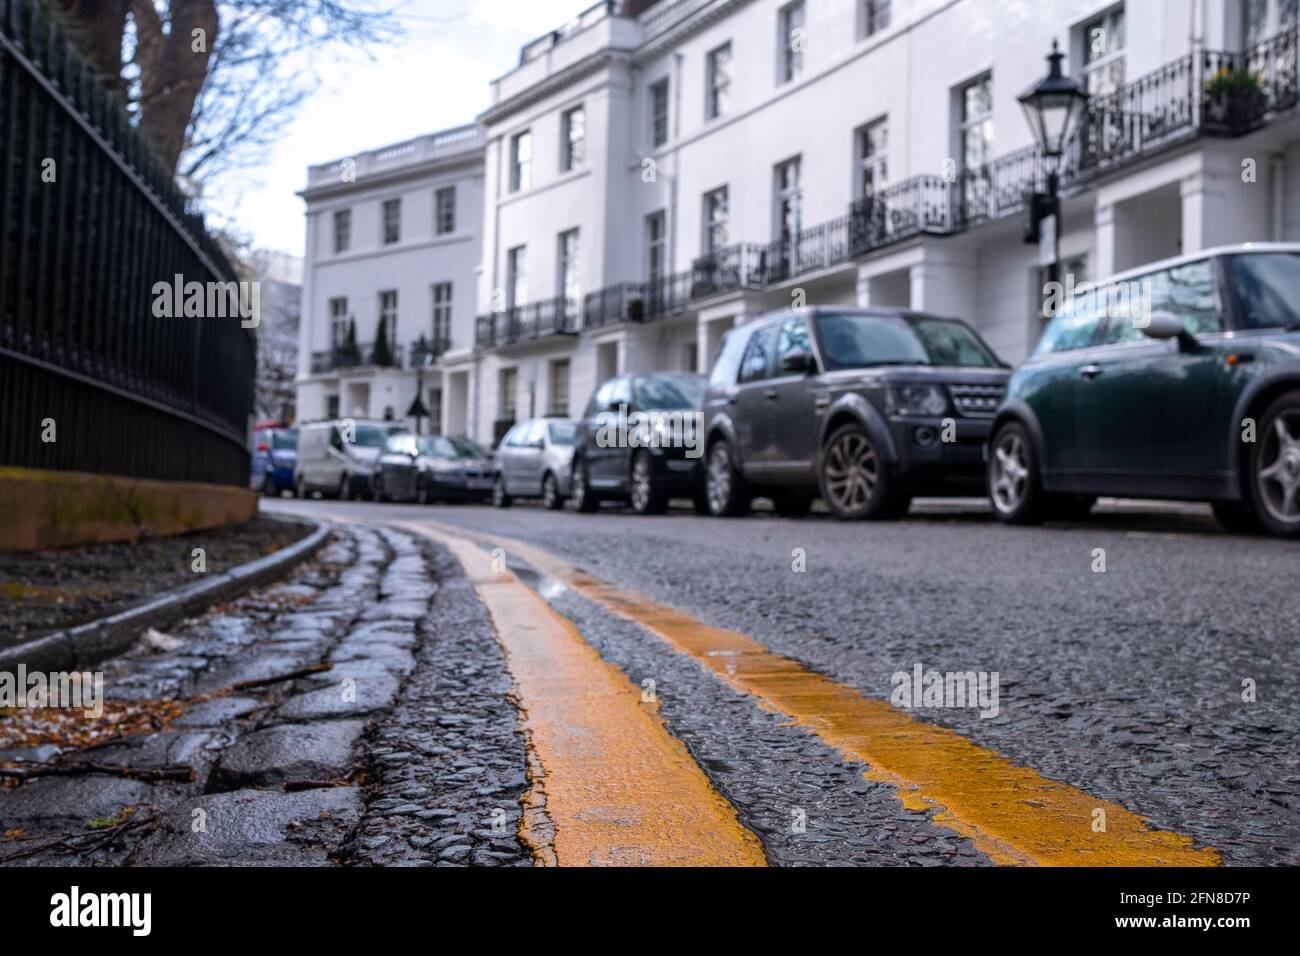 London- May 2021: Residential street of west London townhouses Stock Photo